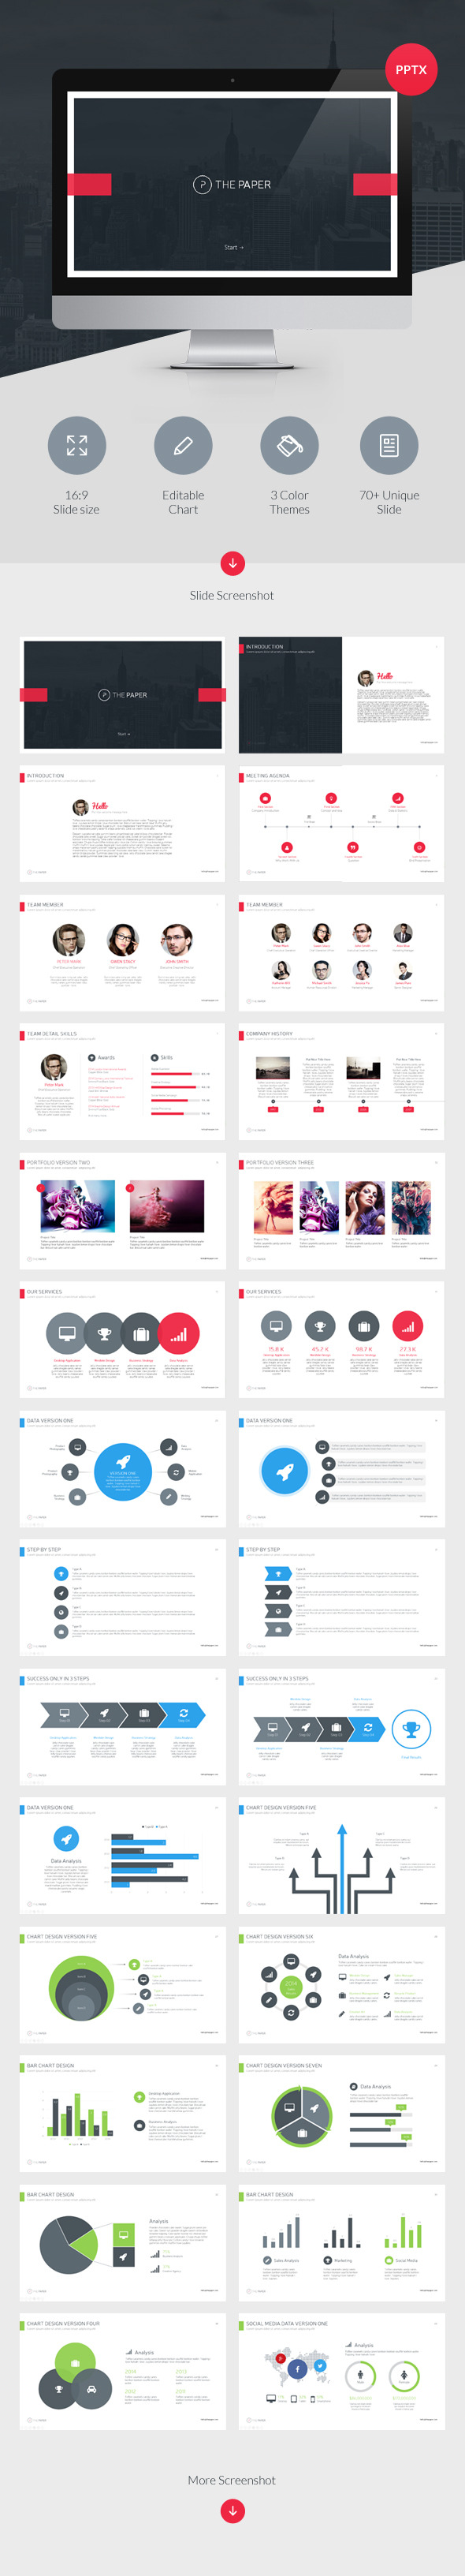 The Paper - Powerpoint Presentation Template